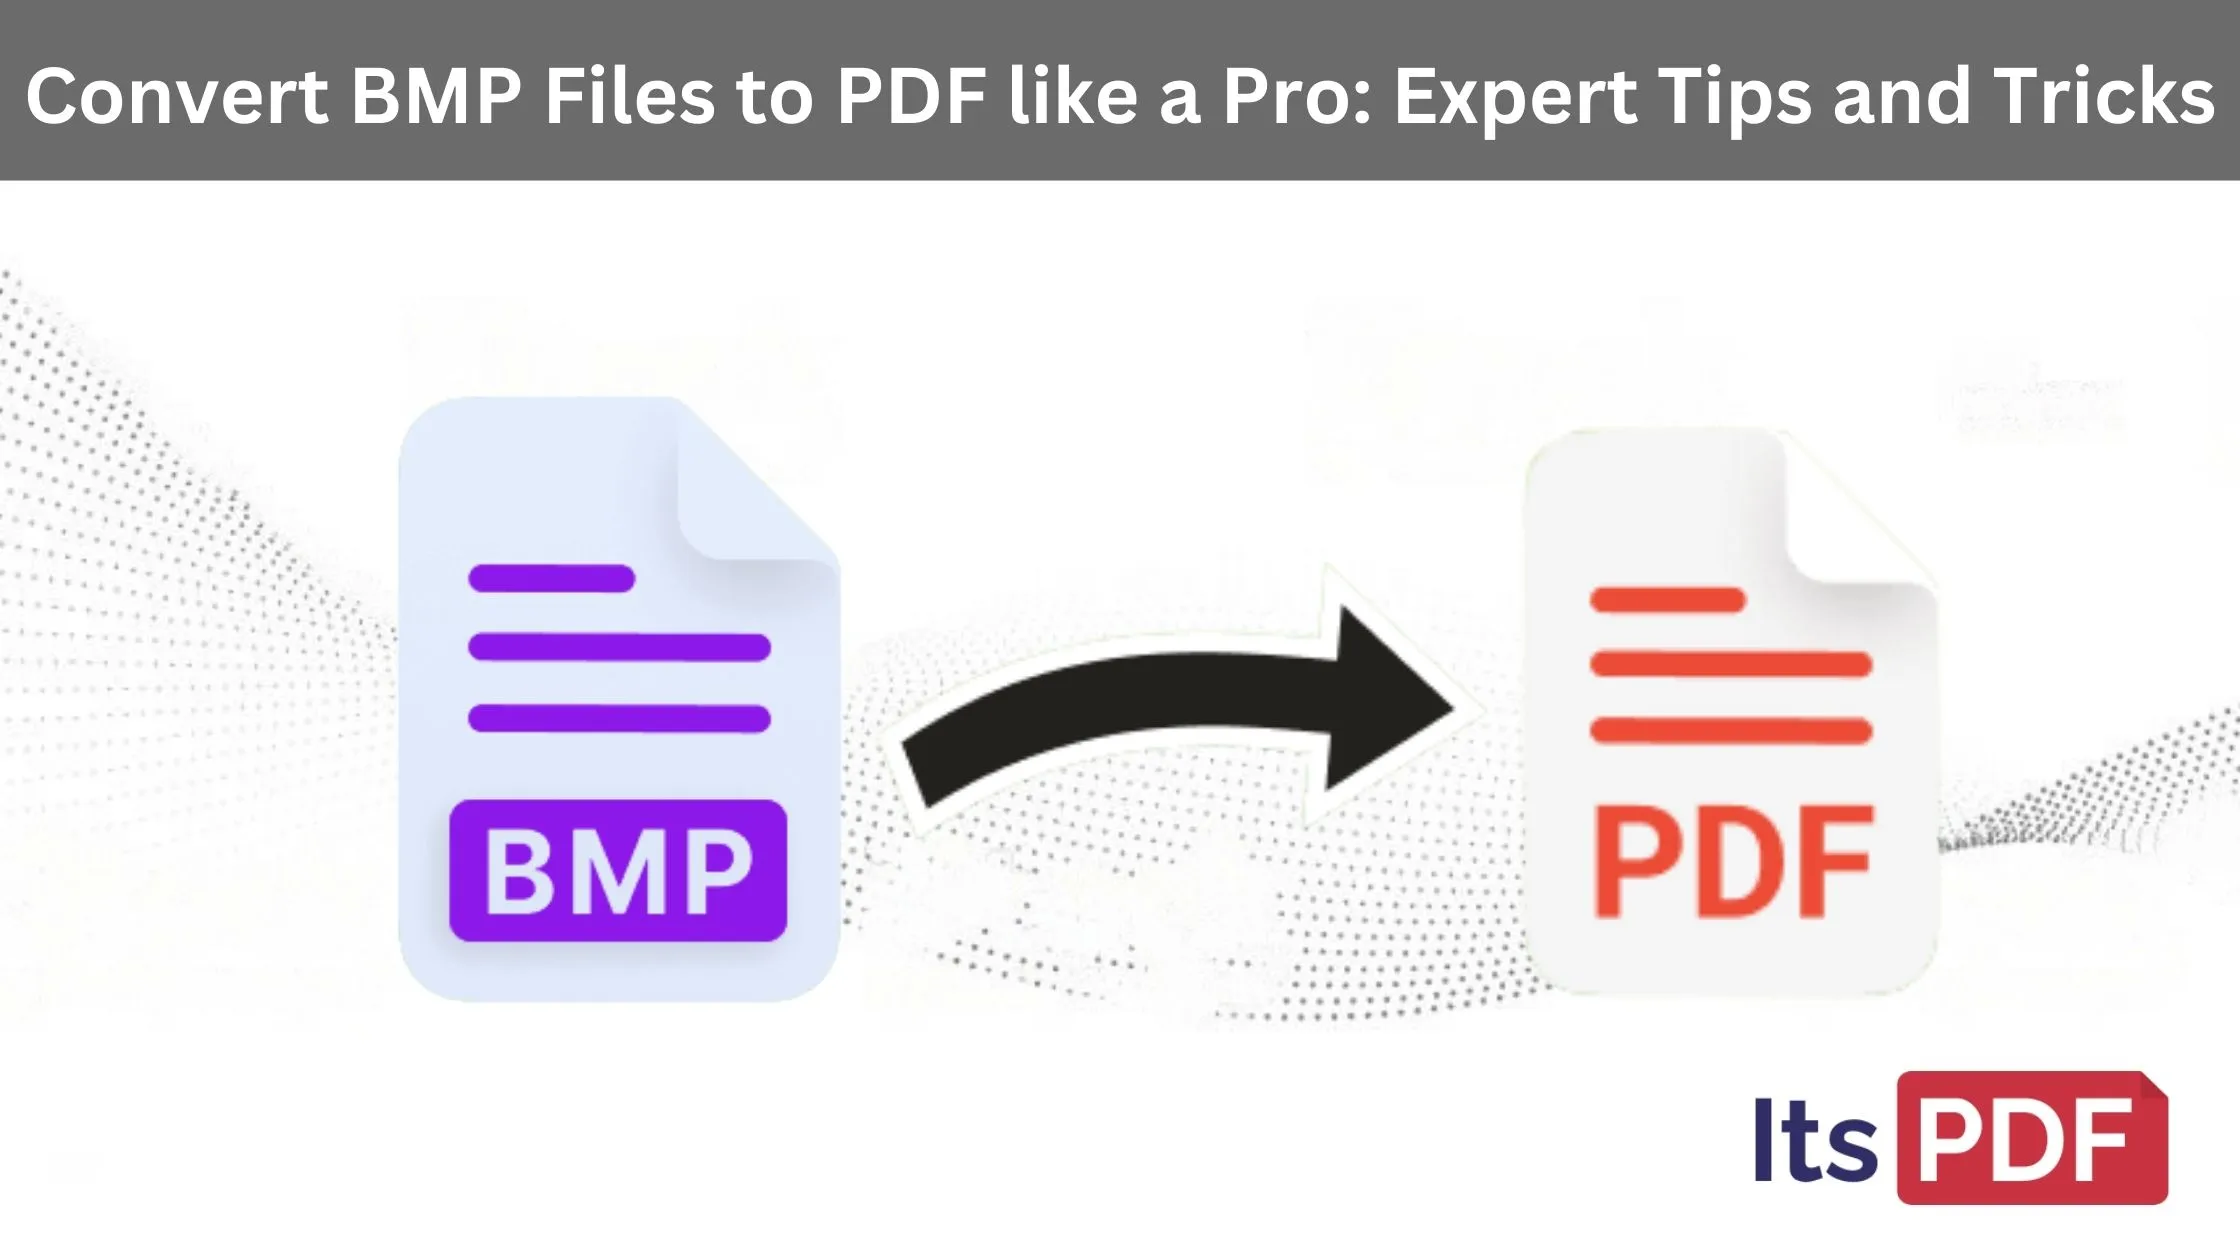 Convert BMP Files to PDF like a Pro: Expert Tips and Tricks